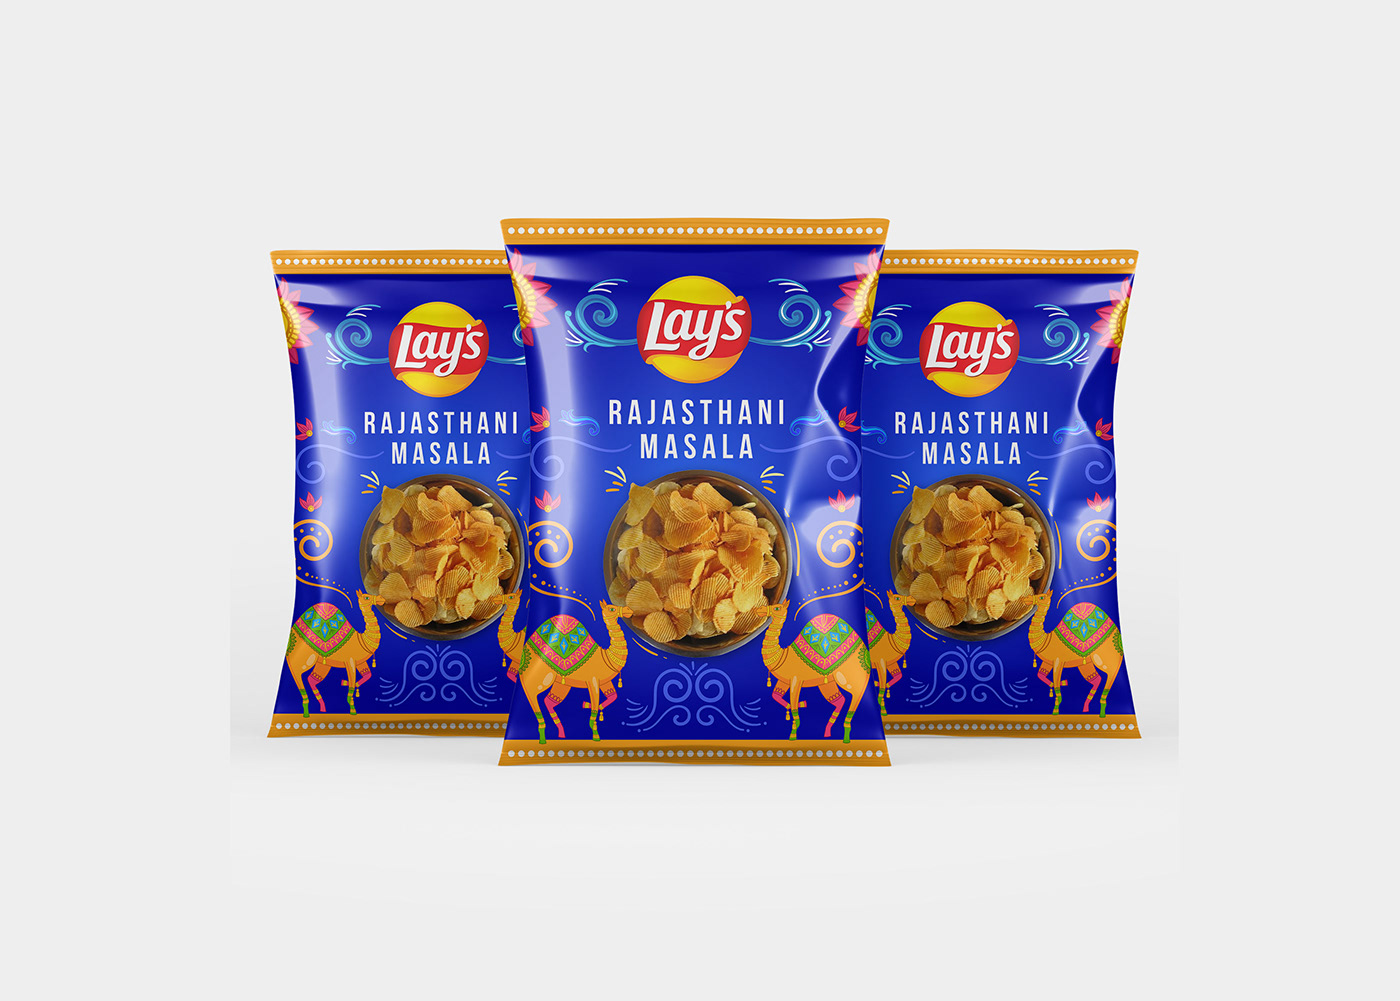 Food  CHIPS PACKAGING  Chips Packet Design layschips design packaging design Packaging package design  lays packaging newproject